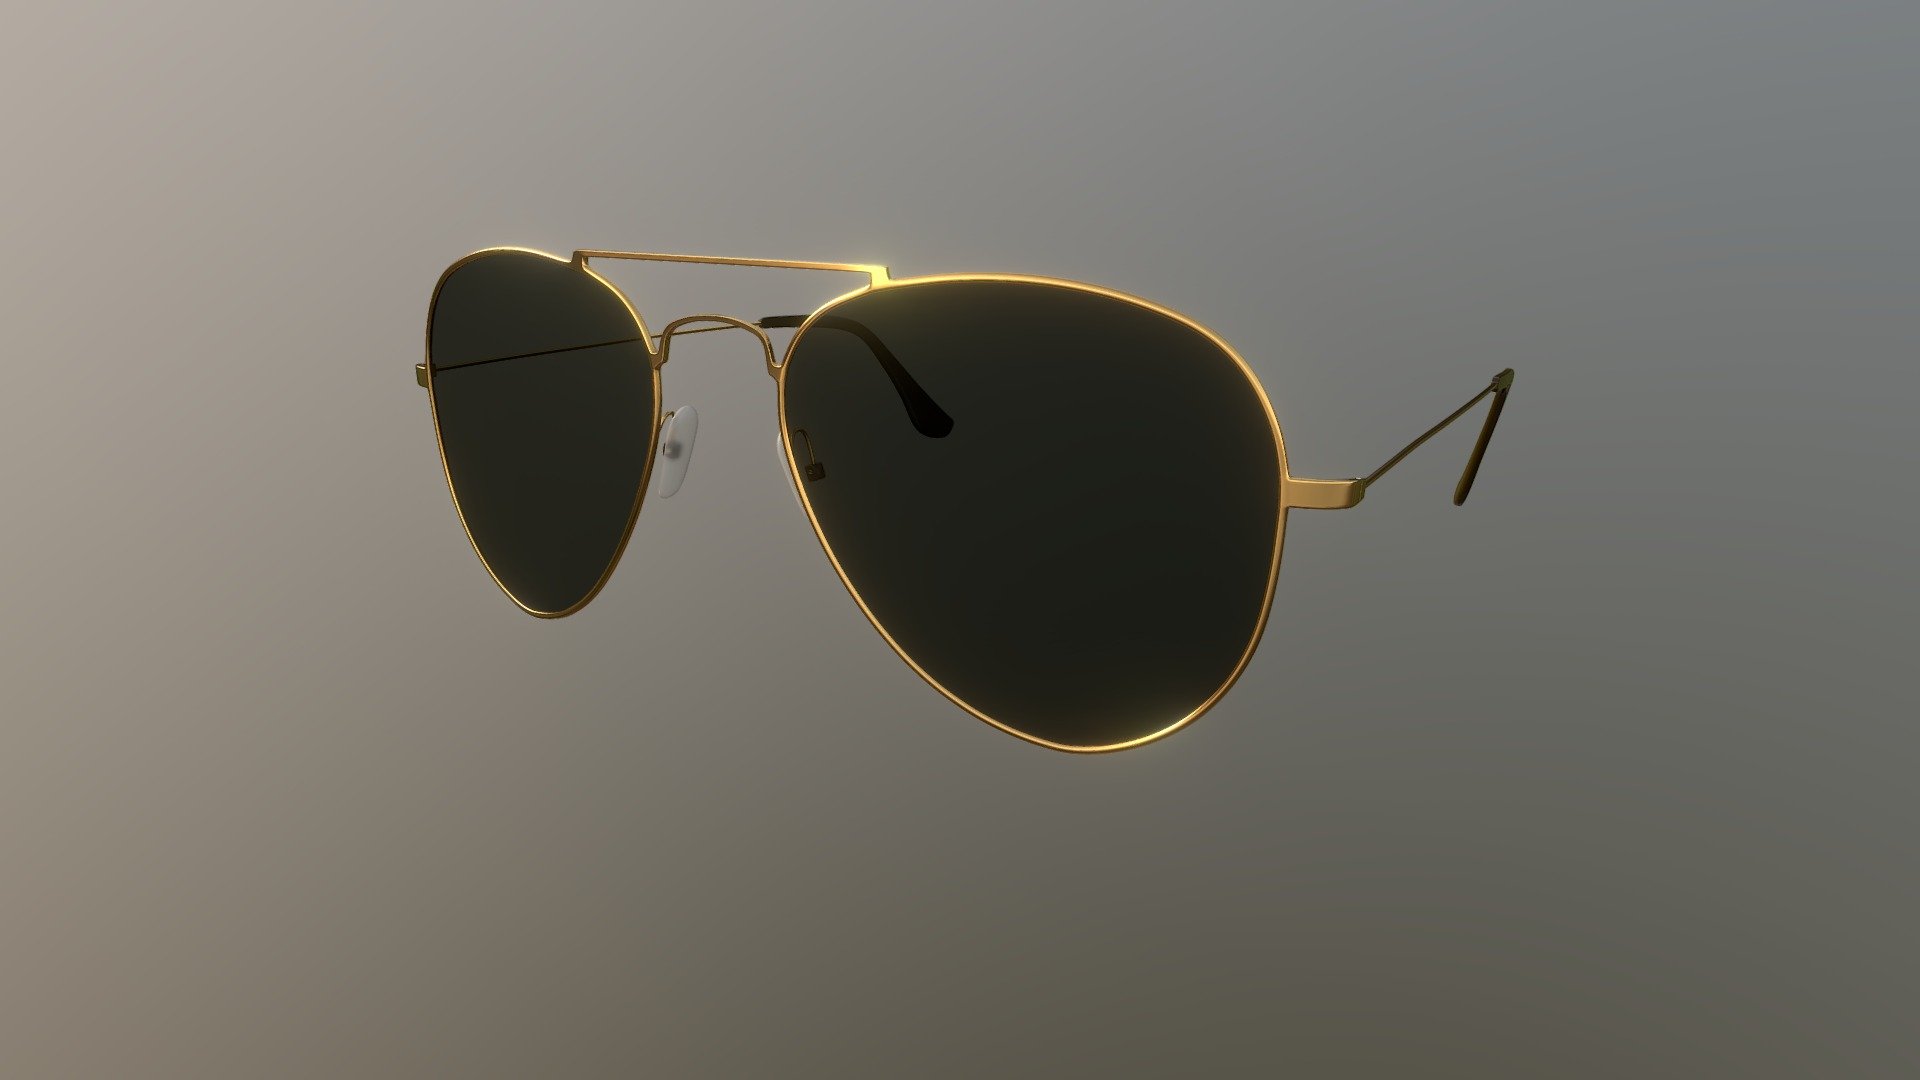 A pair of oldschool aviator sunglasses with a golden frame.
Dimensions: width 14cm, length 15cm, height 5cm.
Modeled in blender 3d model